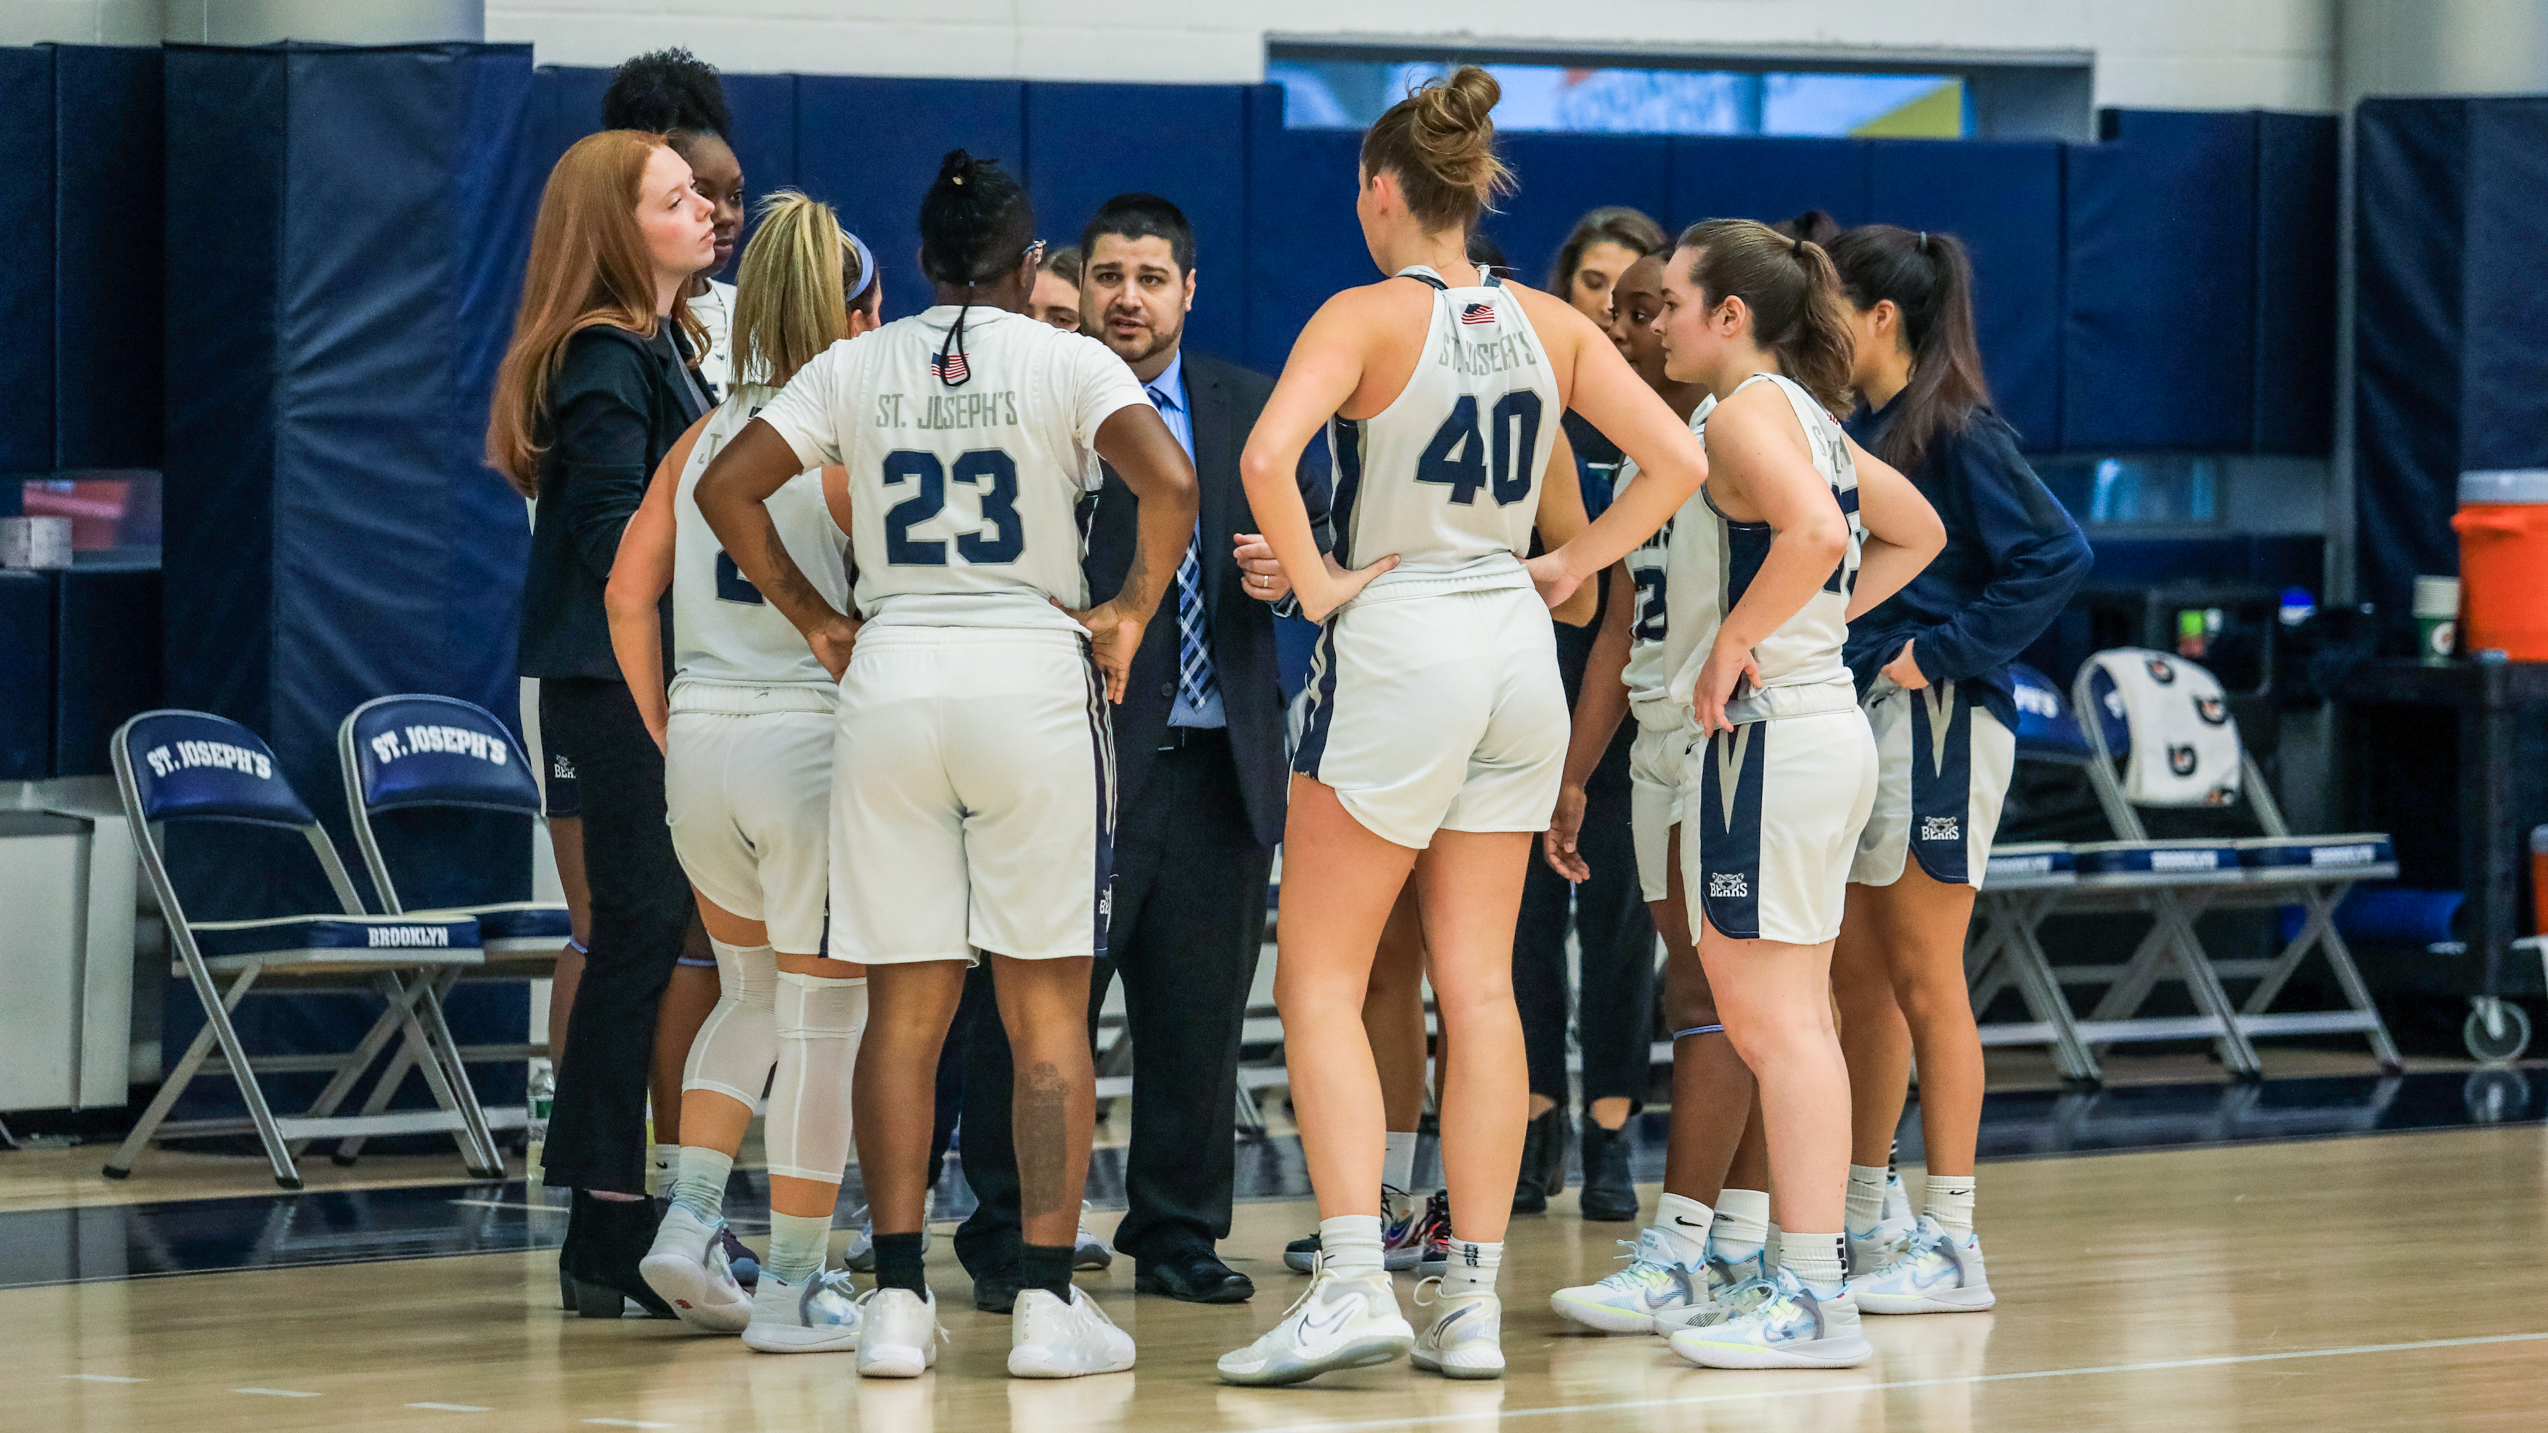 No. 5 Women's Basketball's Season Concludes with First-Round Defeat to No. 4 St. Joseph’s (LI)